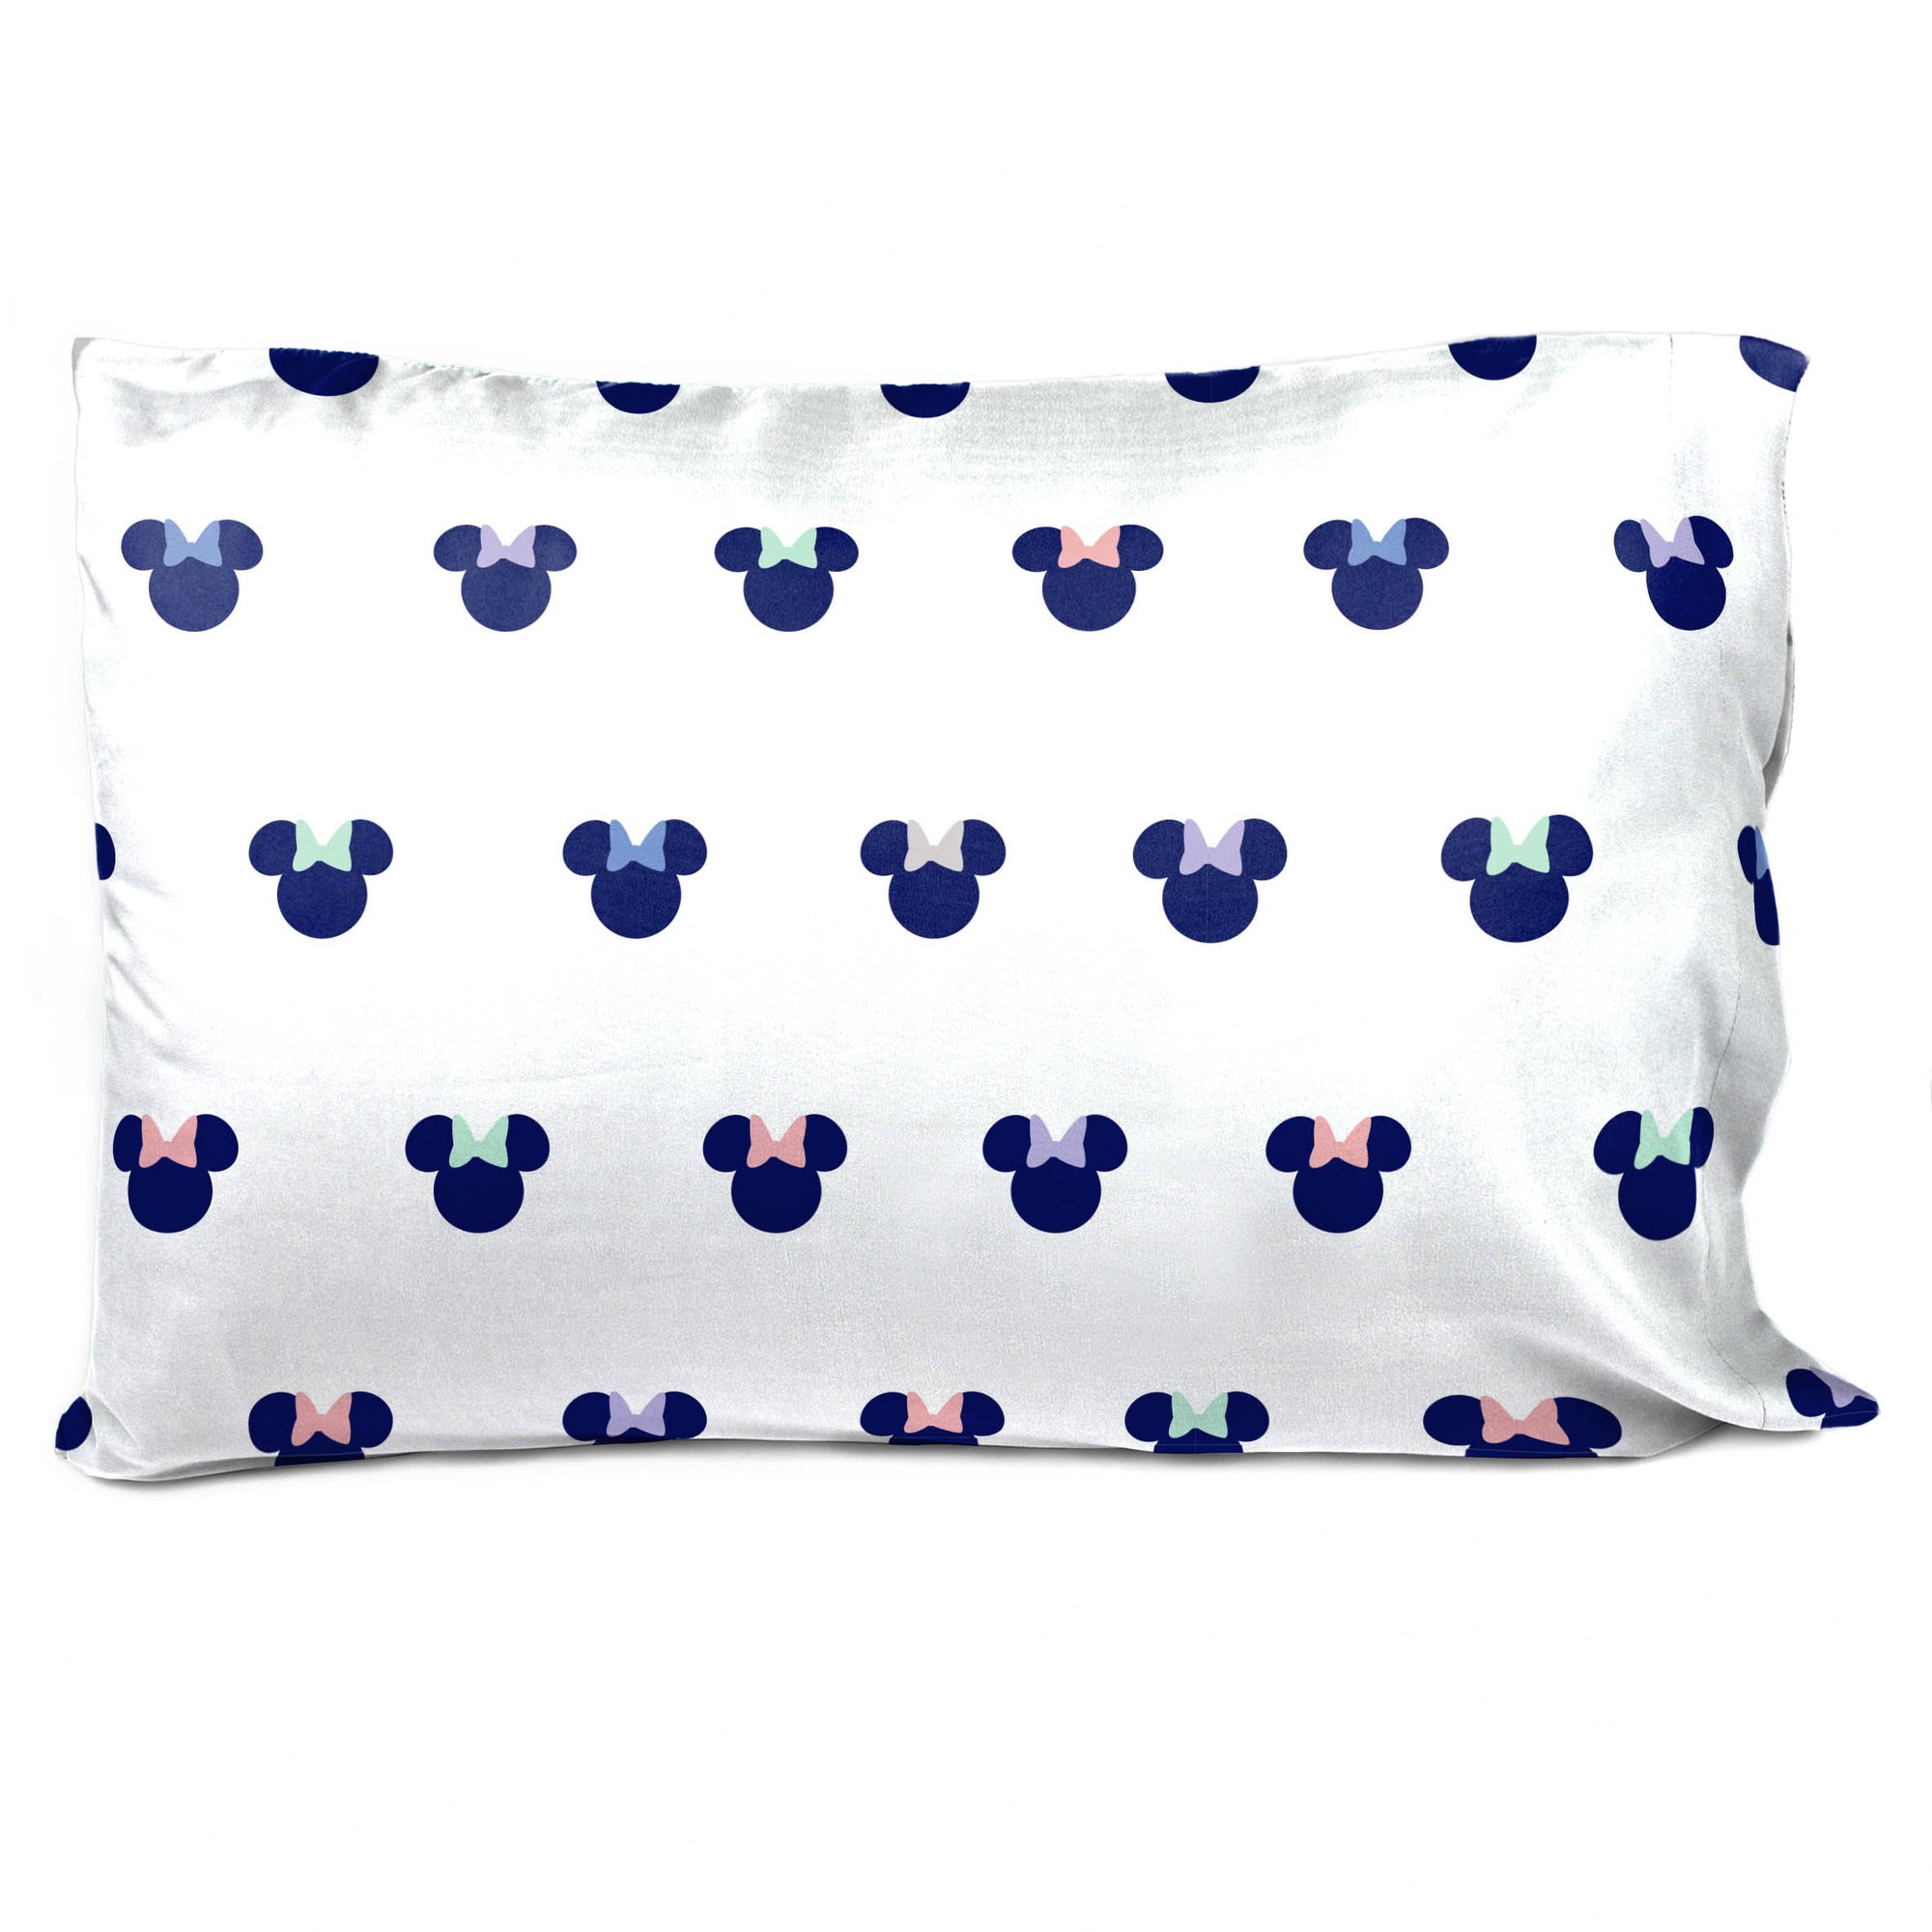 Saturday Park Disney Minnie Mouse Dreaming of Dots 100% Organic Cotton Pillowcase